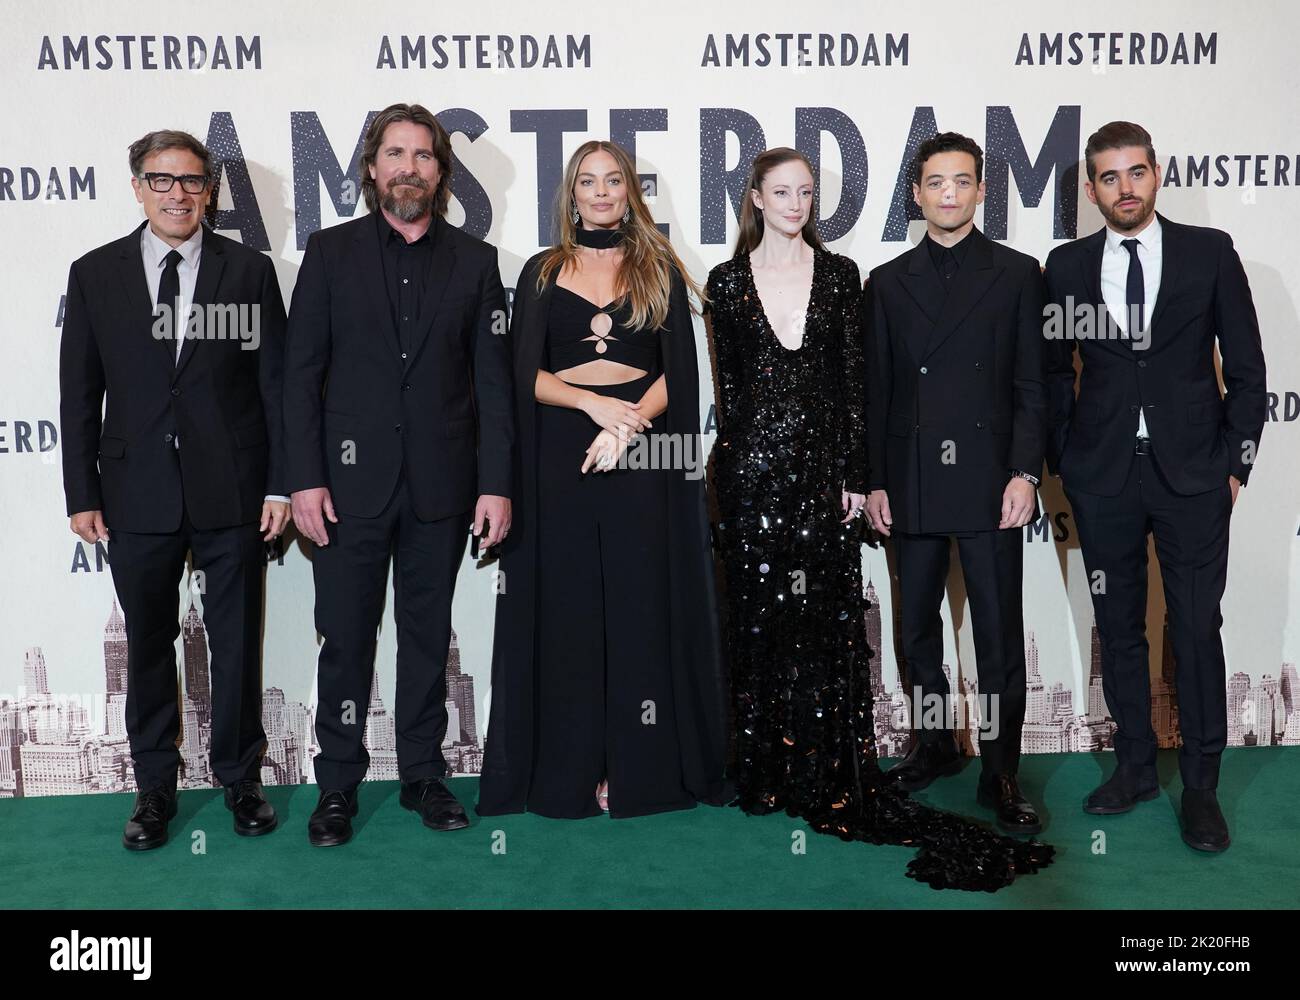 David O Russell, Christian Bale, Margot Robbie, Andrea Riseborough, Rami Malek and Matthew Budman attend the European premiere of Amsterdam at the Odeon Luxe Leicester Square, London. Picture date: Wednesday September 21, 2022. Stock Photo